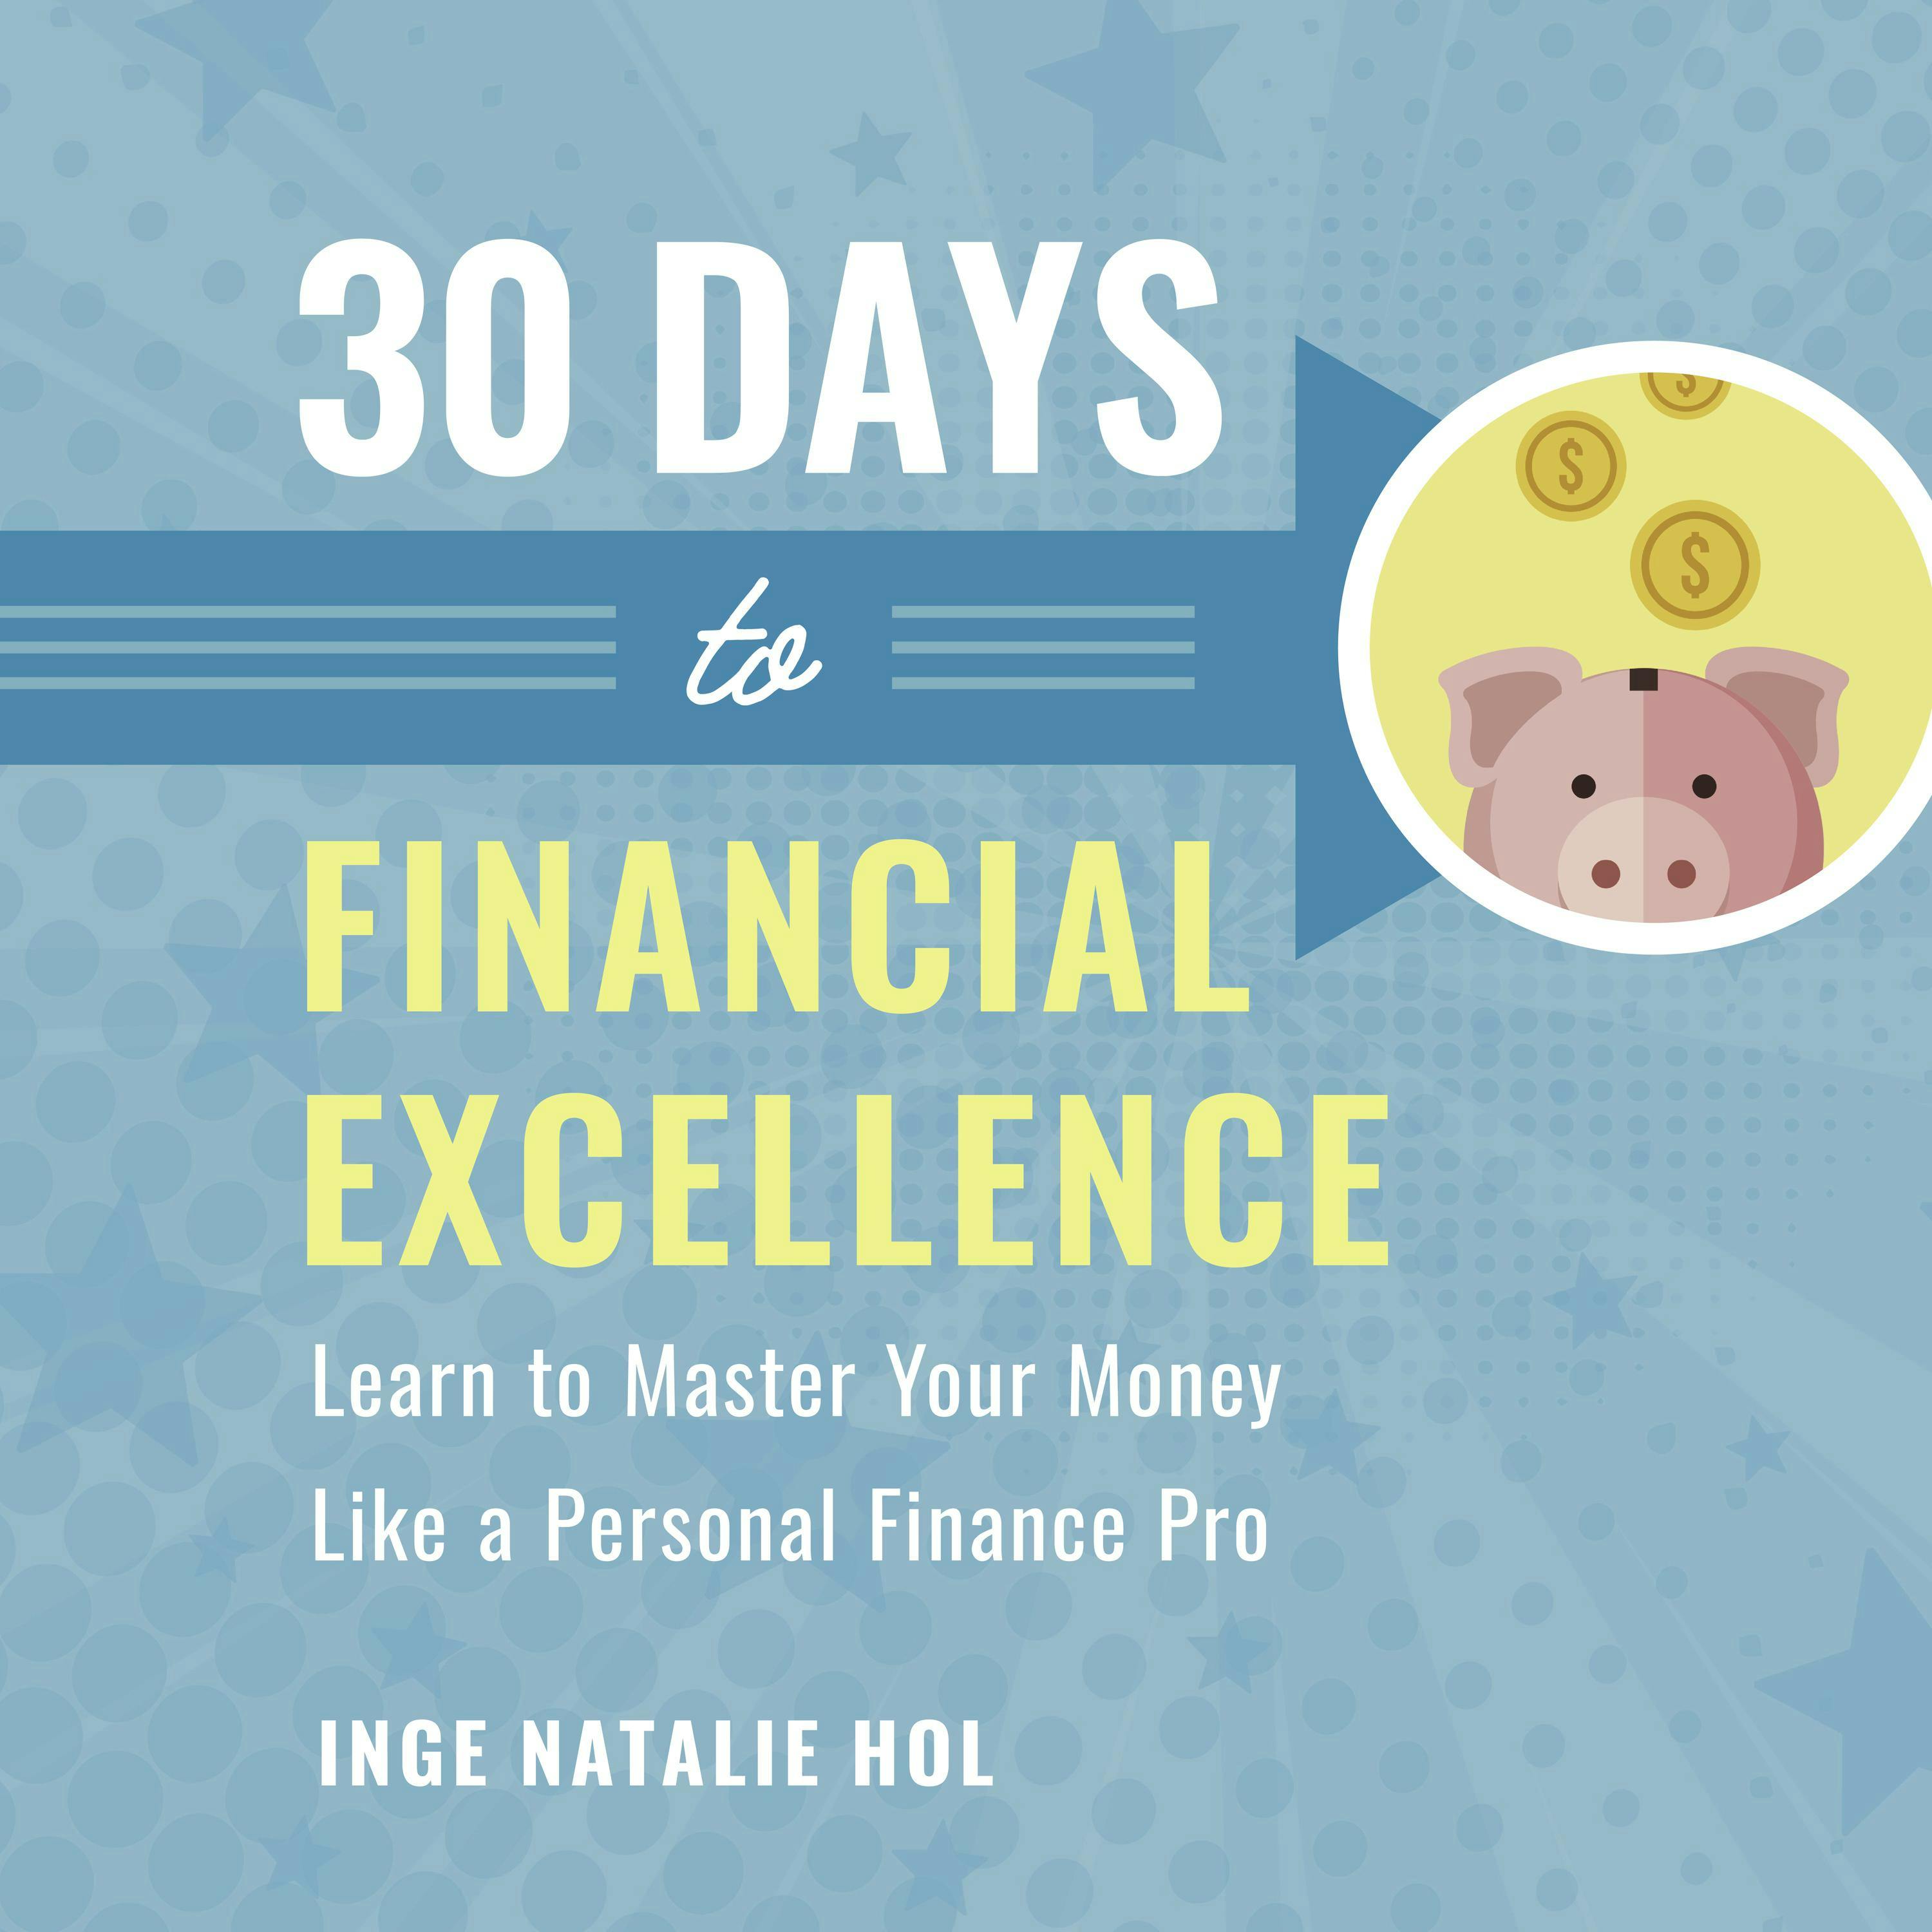 30 Days to Financial Excellence: Learn to Master Your Money Like a Personal Finance Pro - Inge Natalie Hol